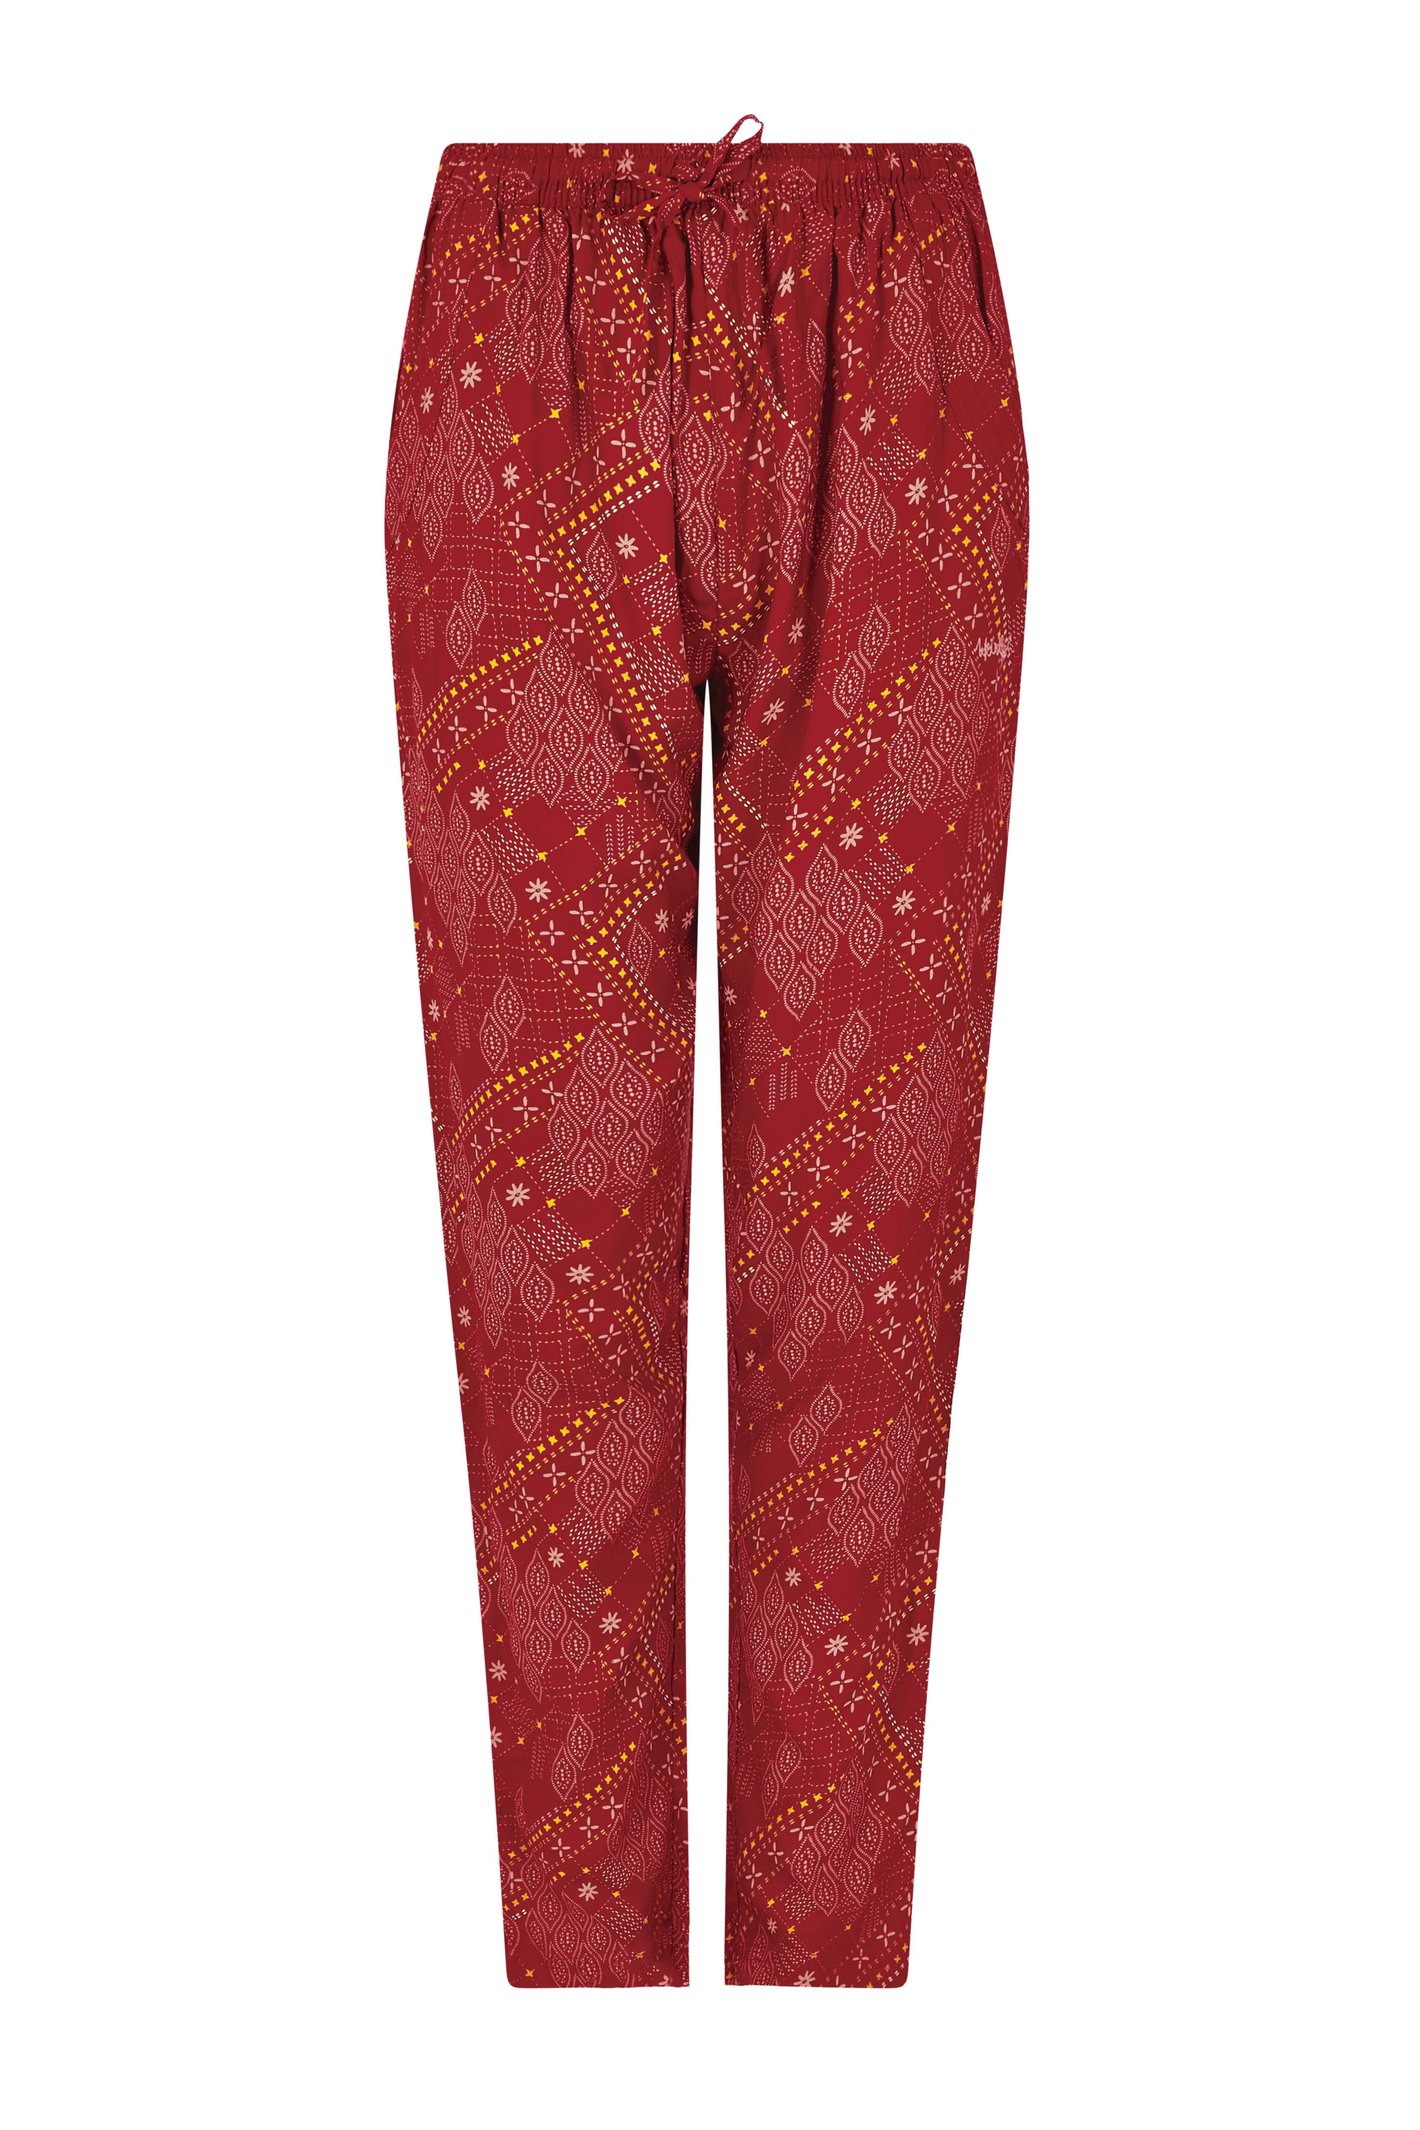 Weird Fish Tinto Eco Viscose Printed Trousers Chilli Red Size 8